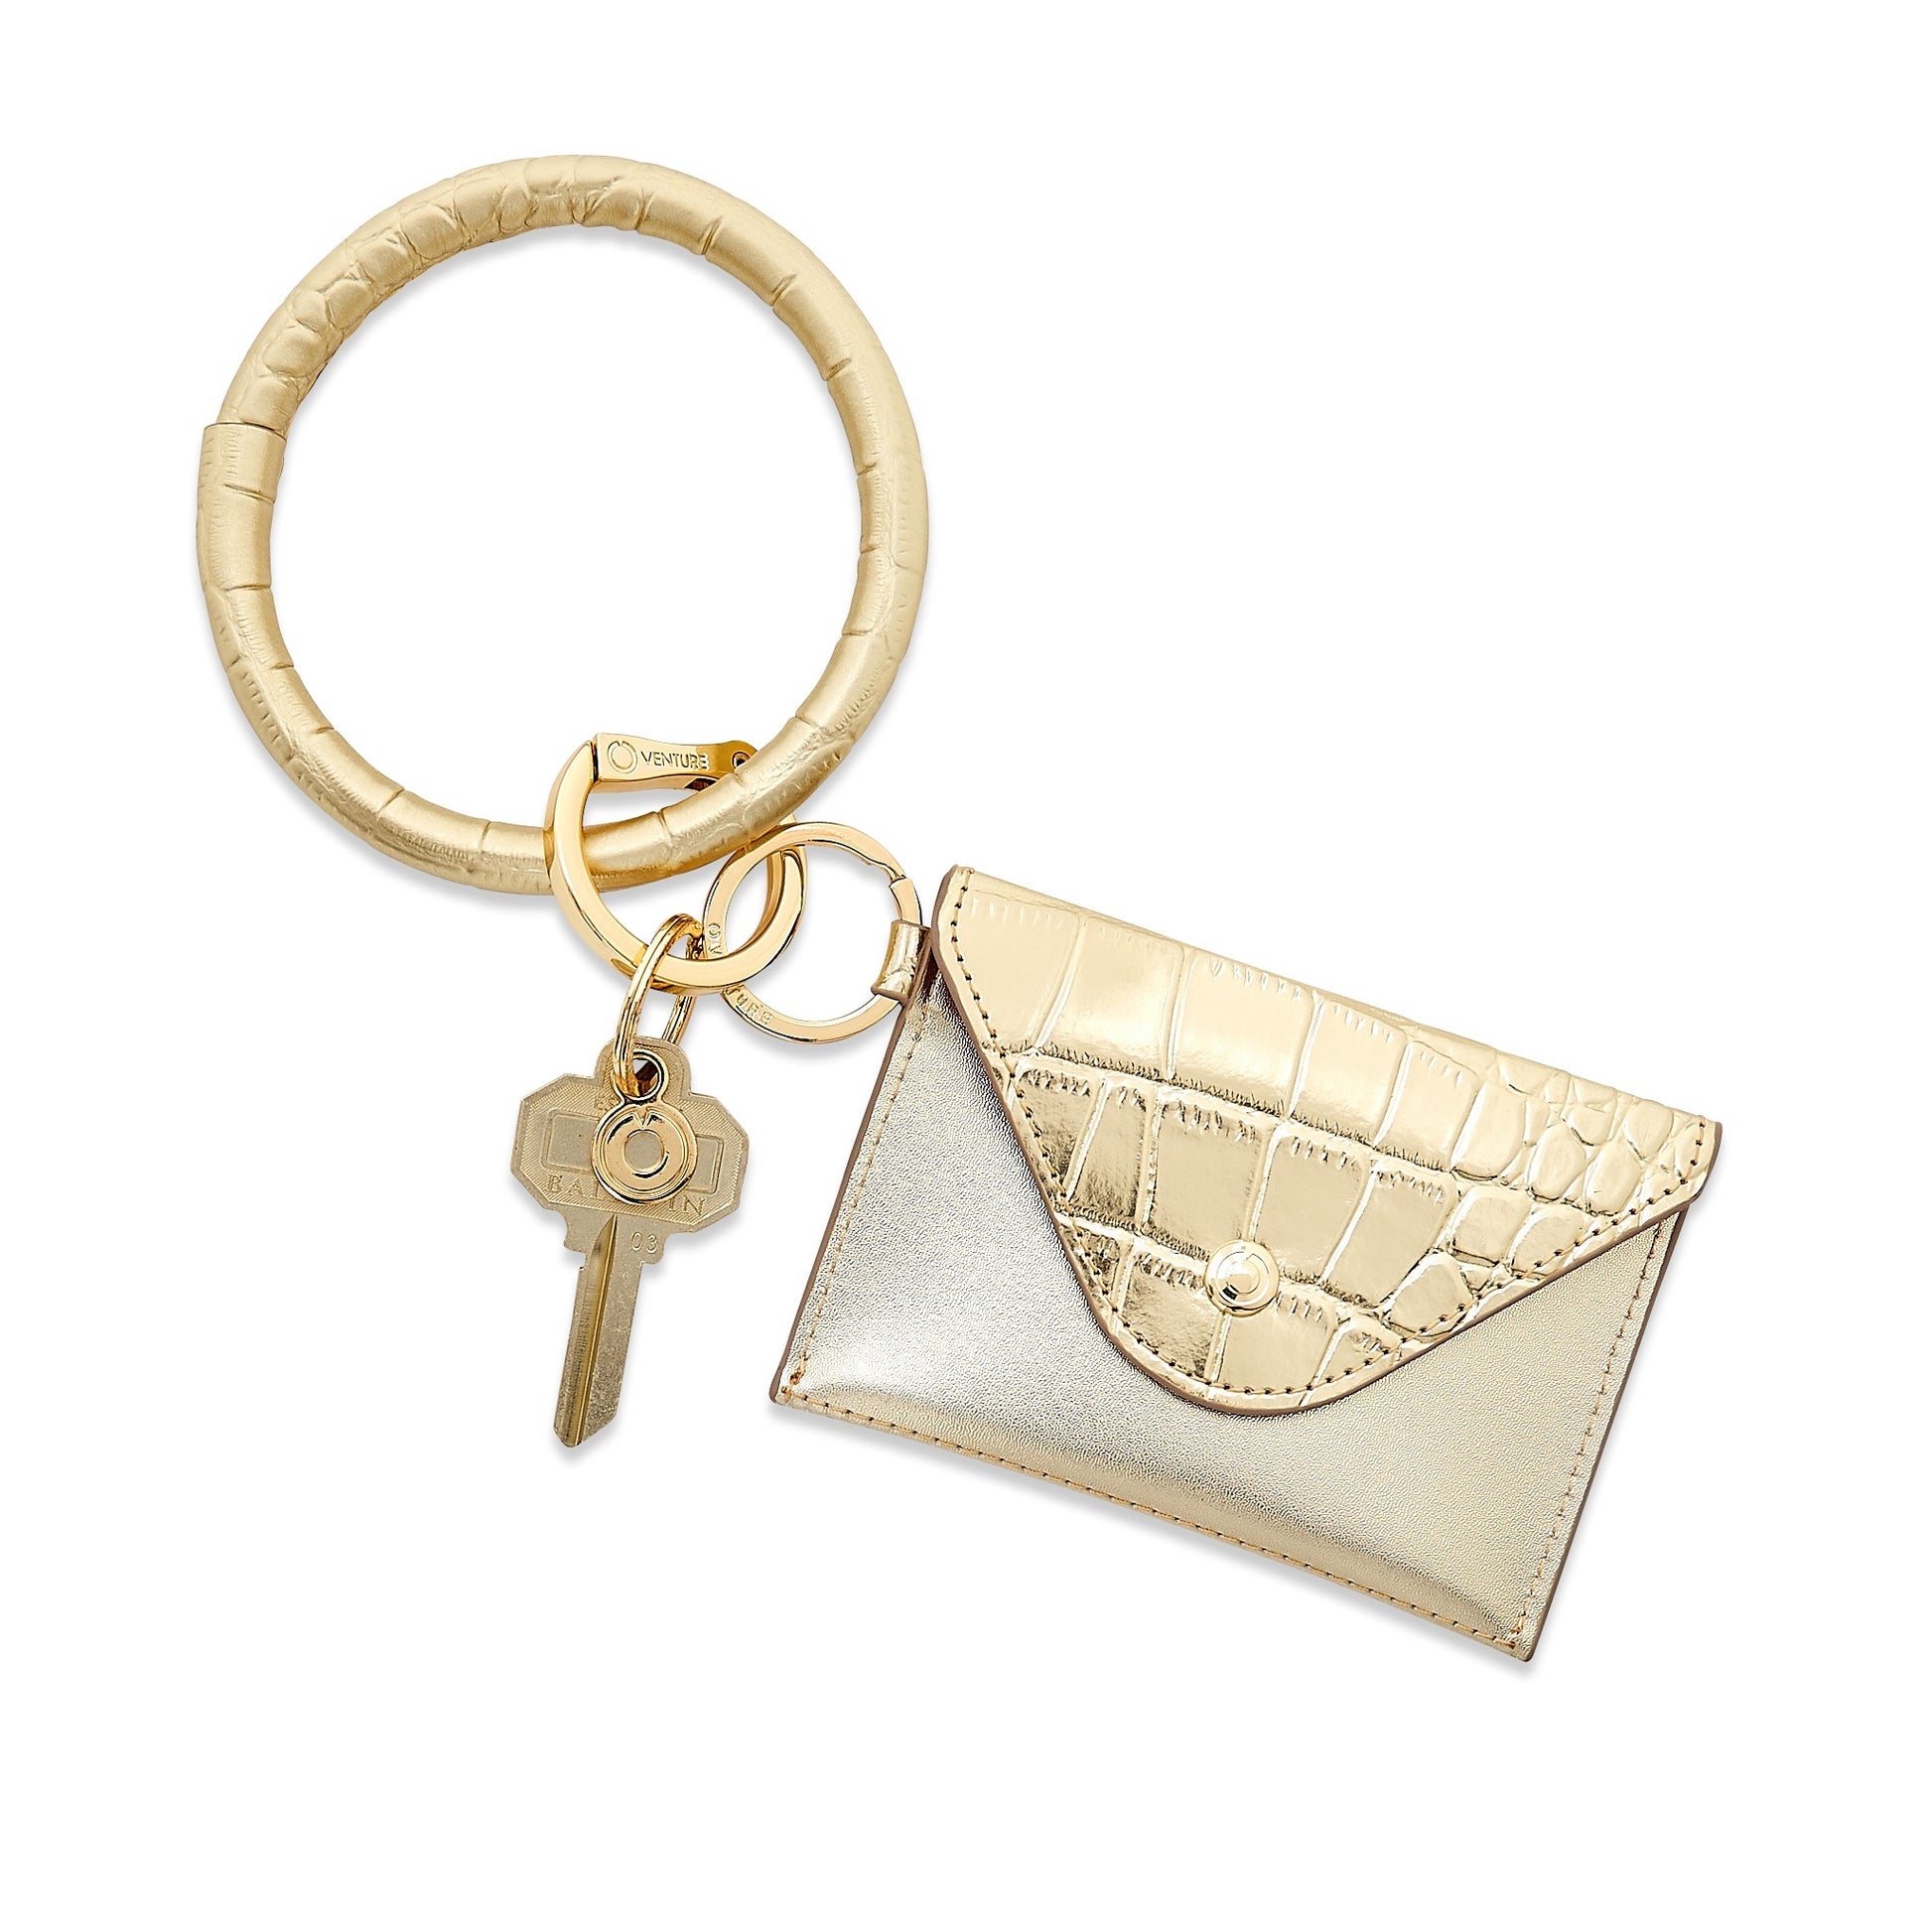 Solid Gold Rush Croc-Embossed - Mini Envelope Wallet by Oventure attached to Big O Key Ring in Solid Gold Rush Croc embossed leather.